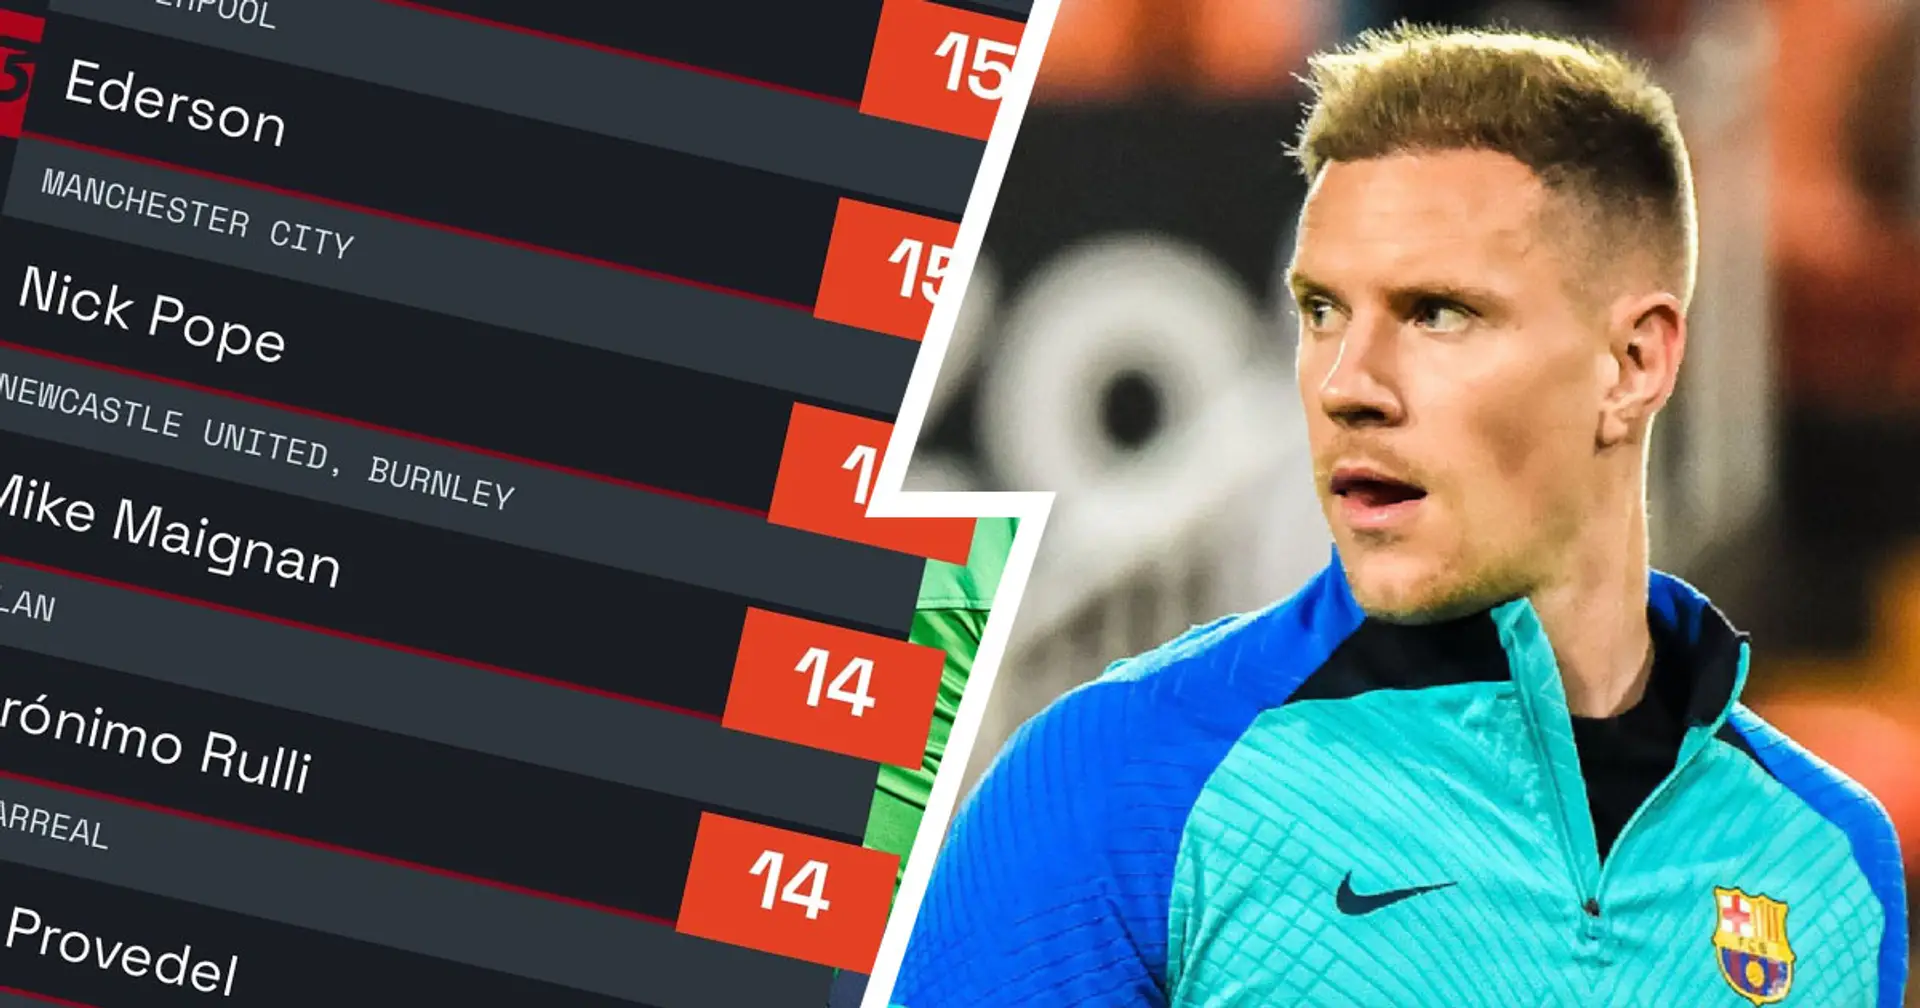 Ter Stegen finishes 2022 as goalkeeper with most clean sheets in top leagues